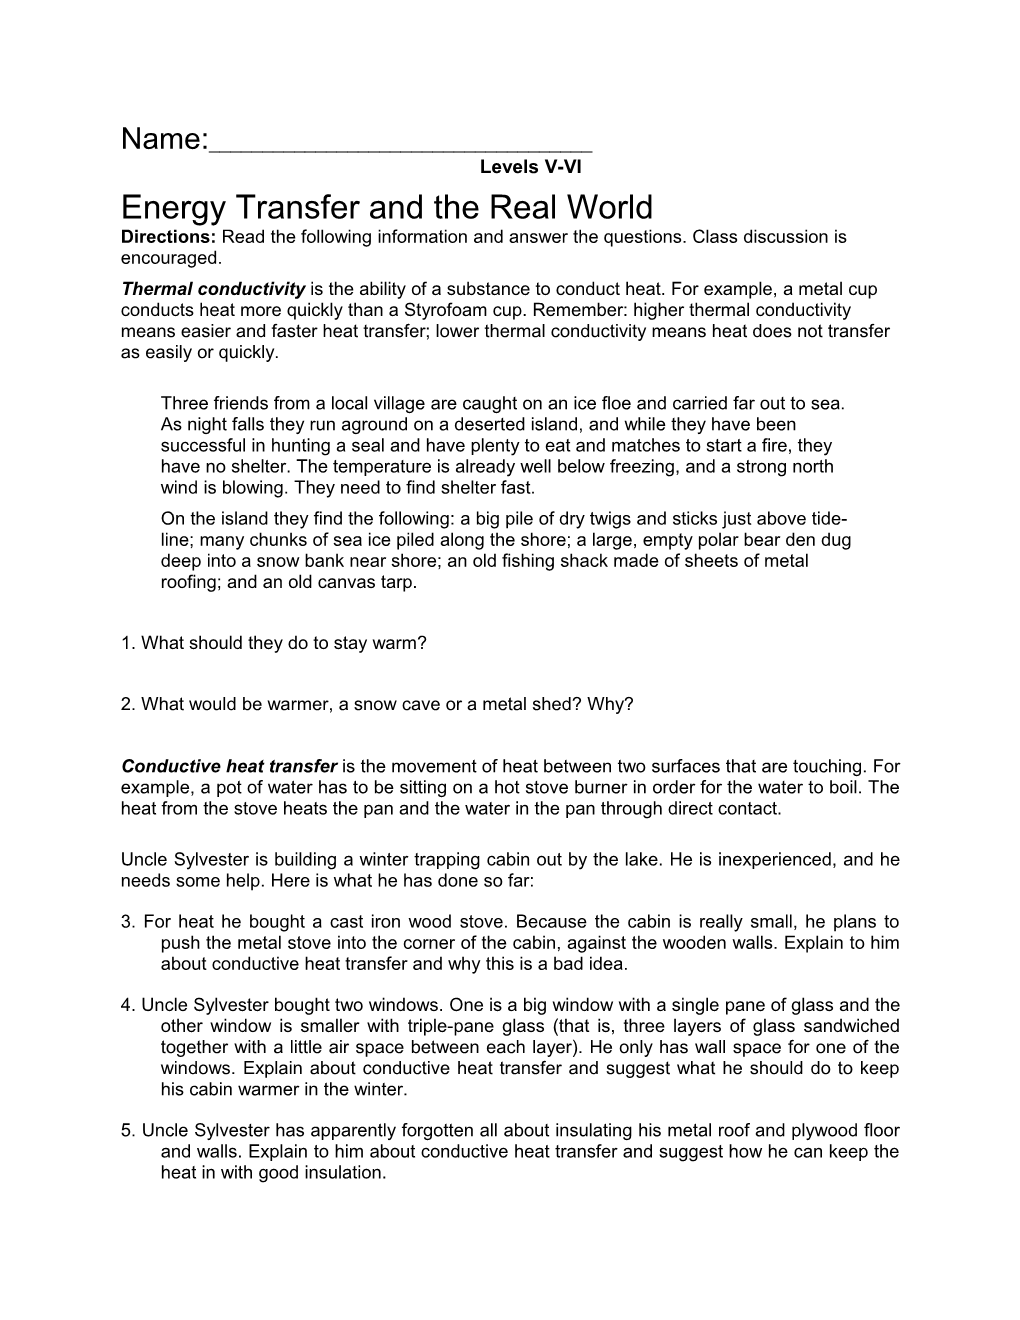 Energy Transfer and the Real World